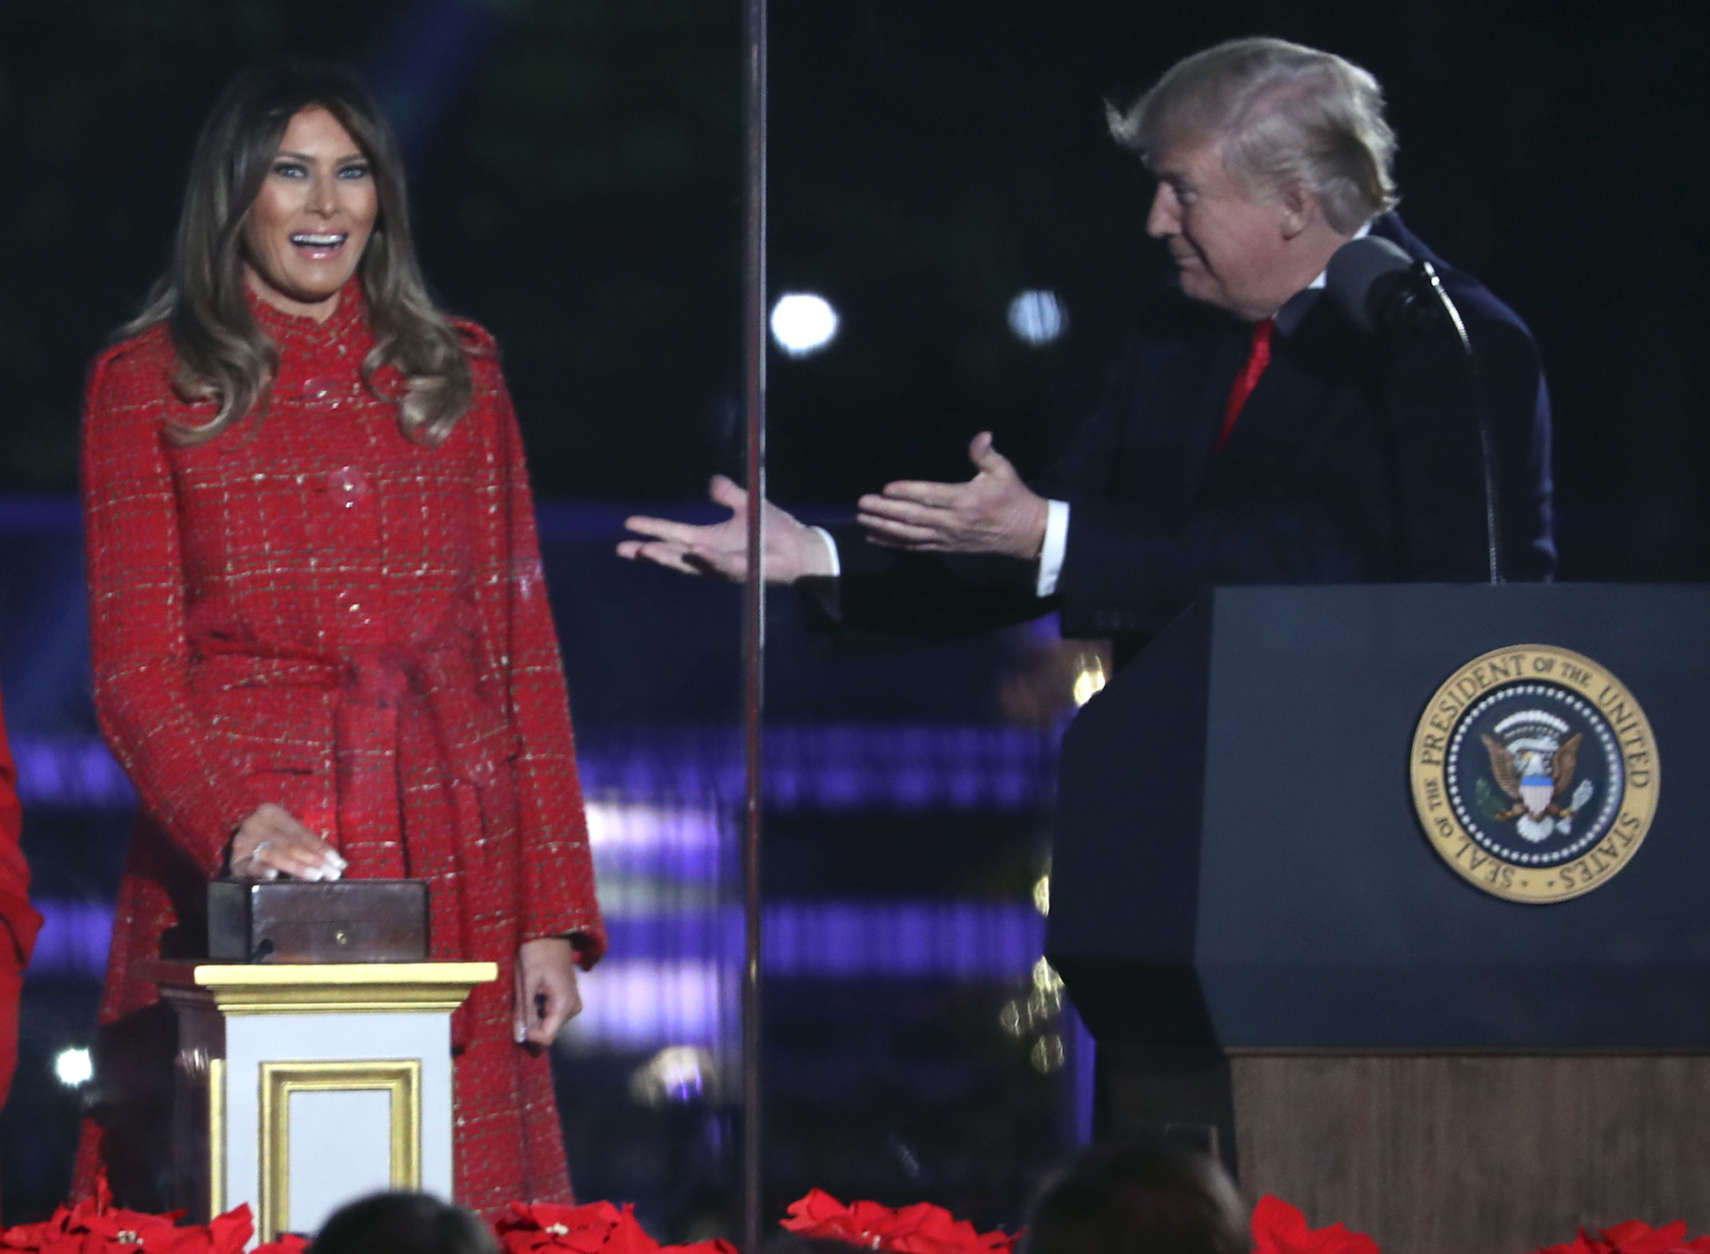 President Donald Trump gestures to first lady Melania Trump to light the 2017 National Christmas Tree on the Ellipse near the White House, Thursday, Nov. 30, 2017, in Washington. (AP Photo/Andrew Harnik)